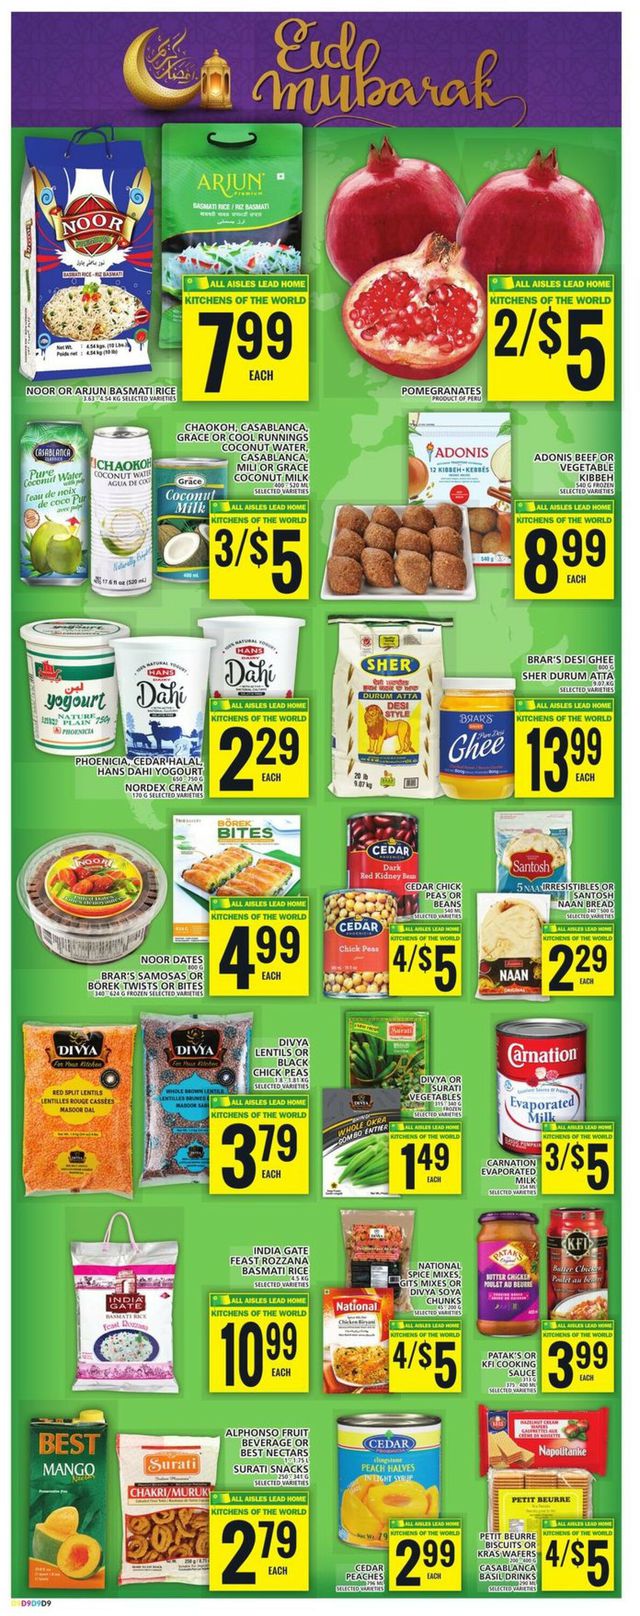 Food Basics Flyer from 04/20/2023